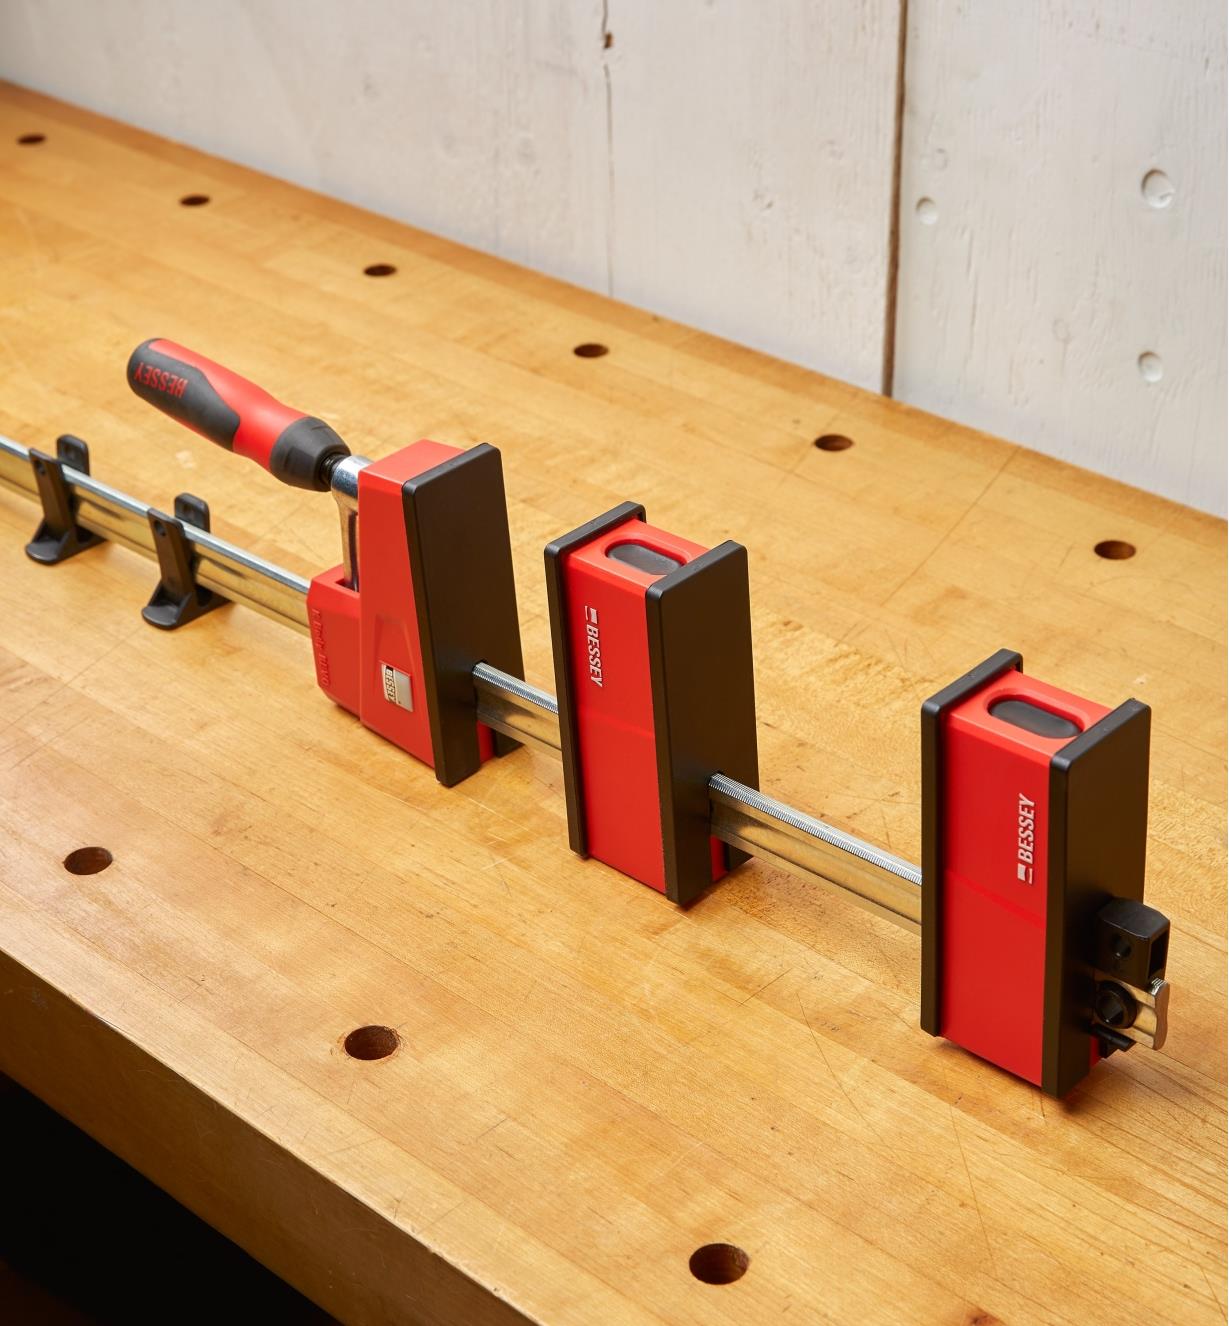 A Bessey clamp with the variable jaw positioned on its rail